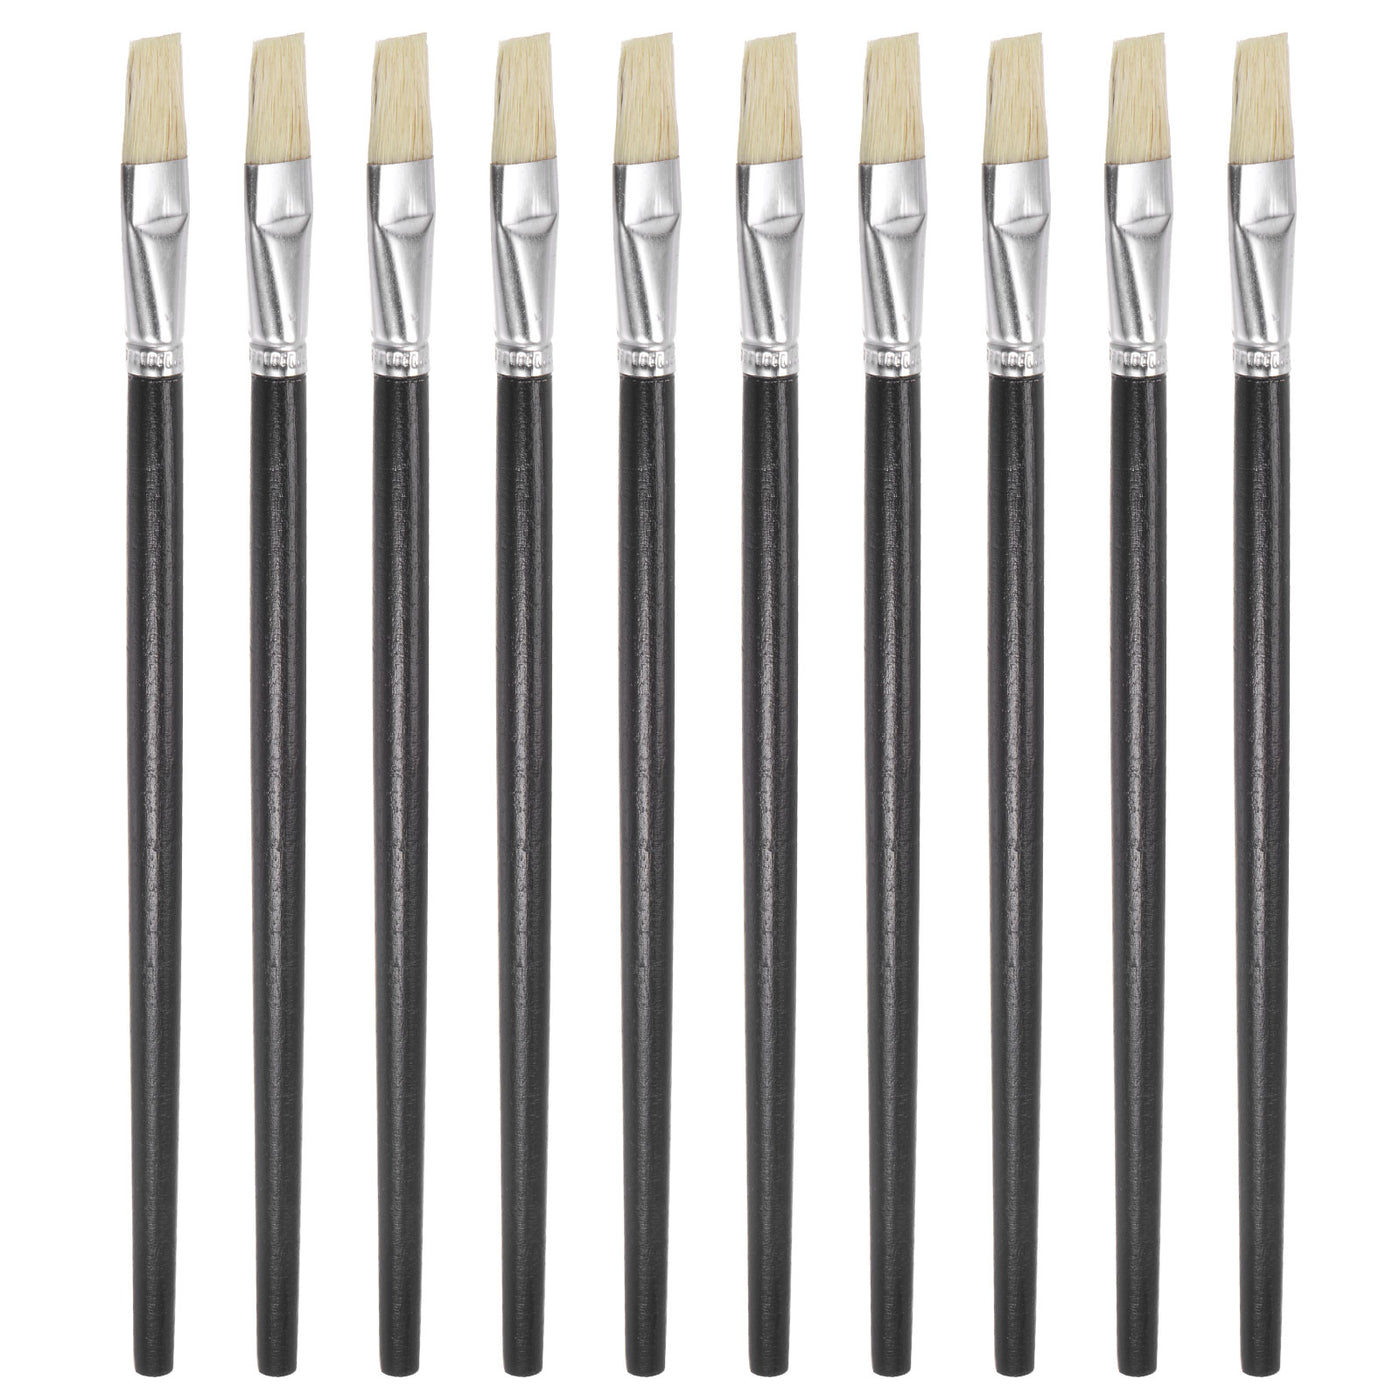 uxcell Uxcell Paint Brushes Flat Edge 0.69" Width 0.22" Thick Bristle with Wood Handle 10Pcs